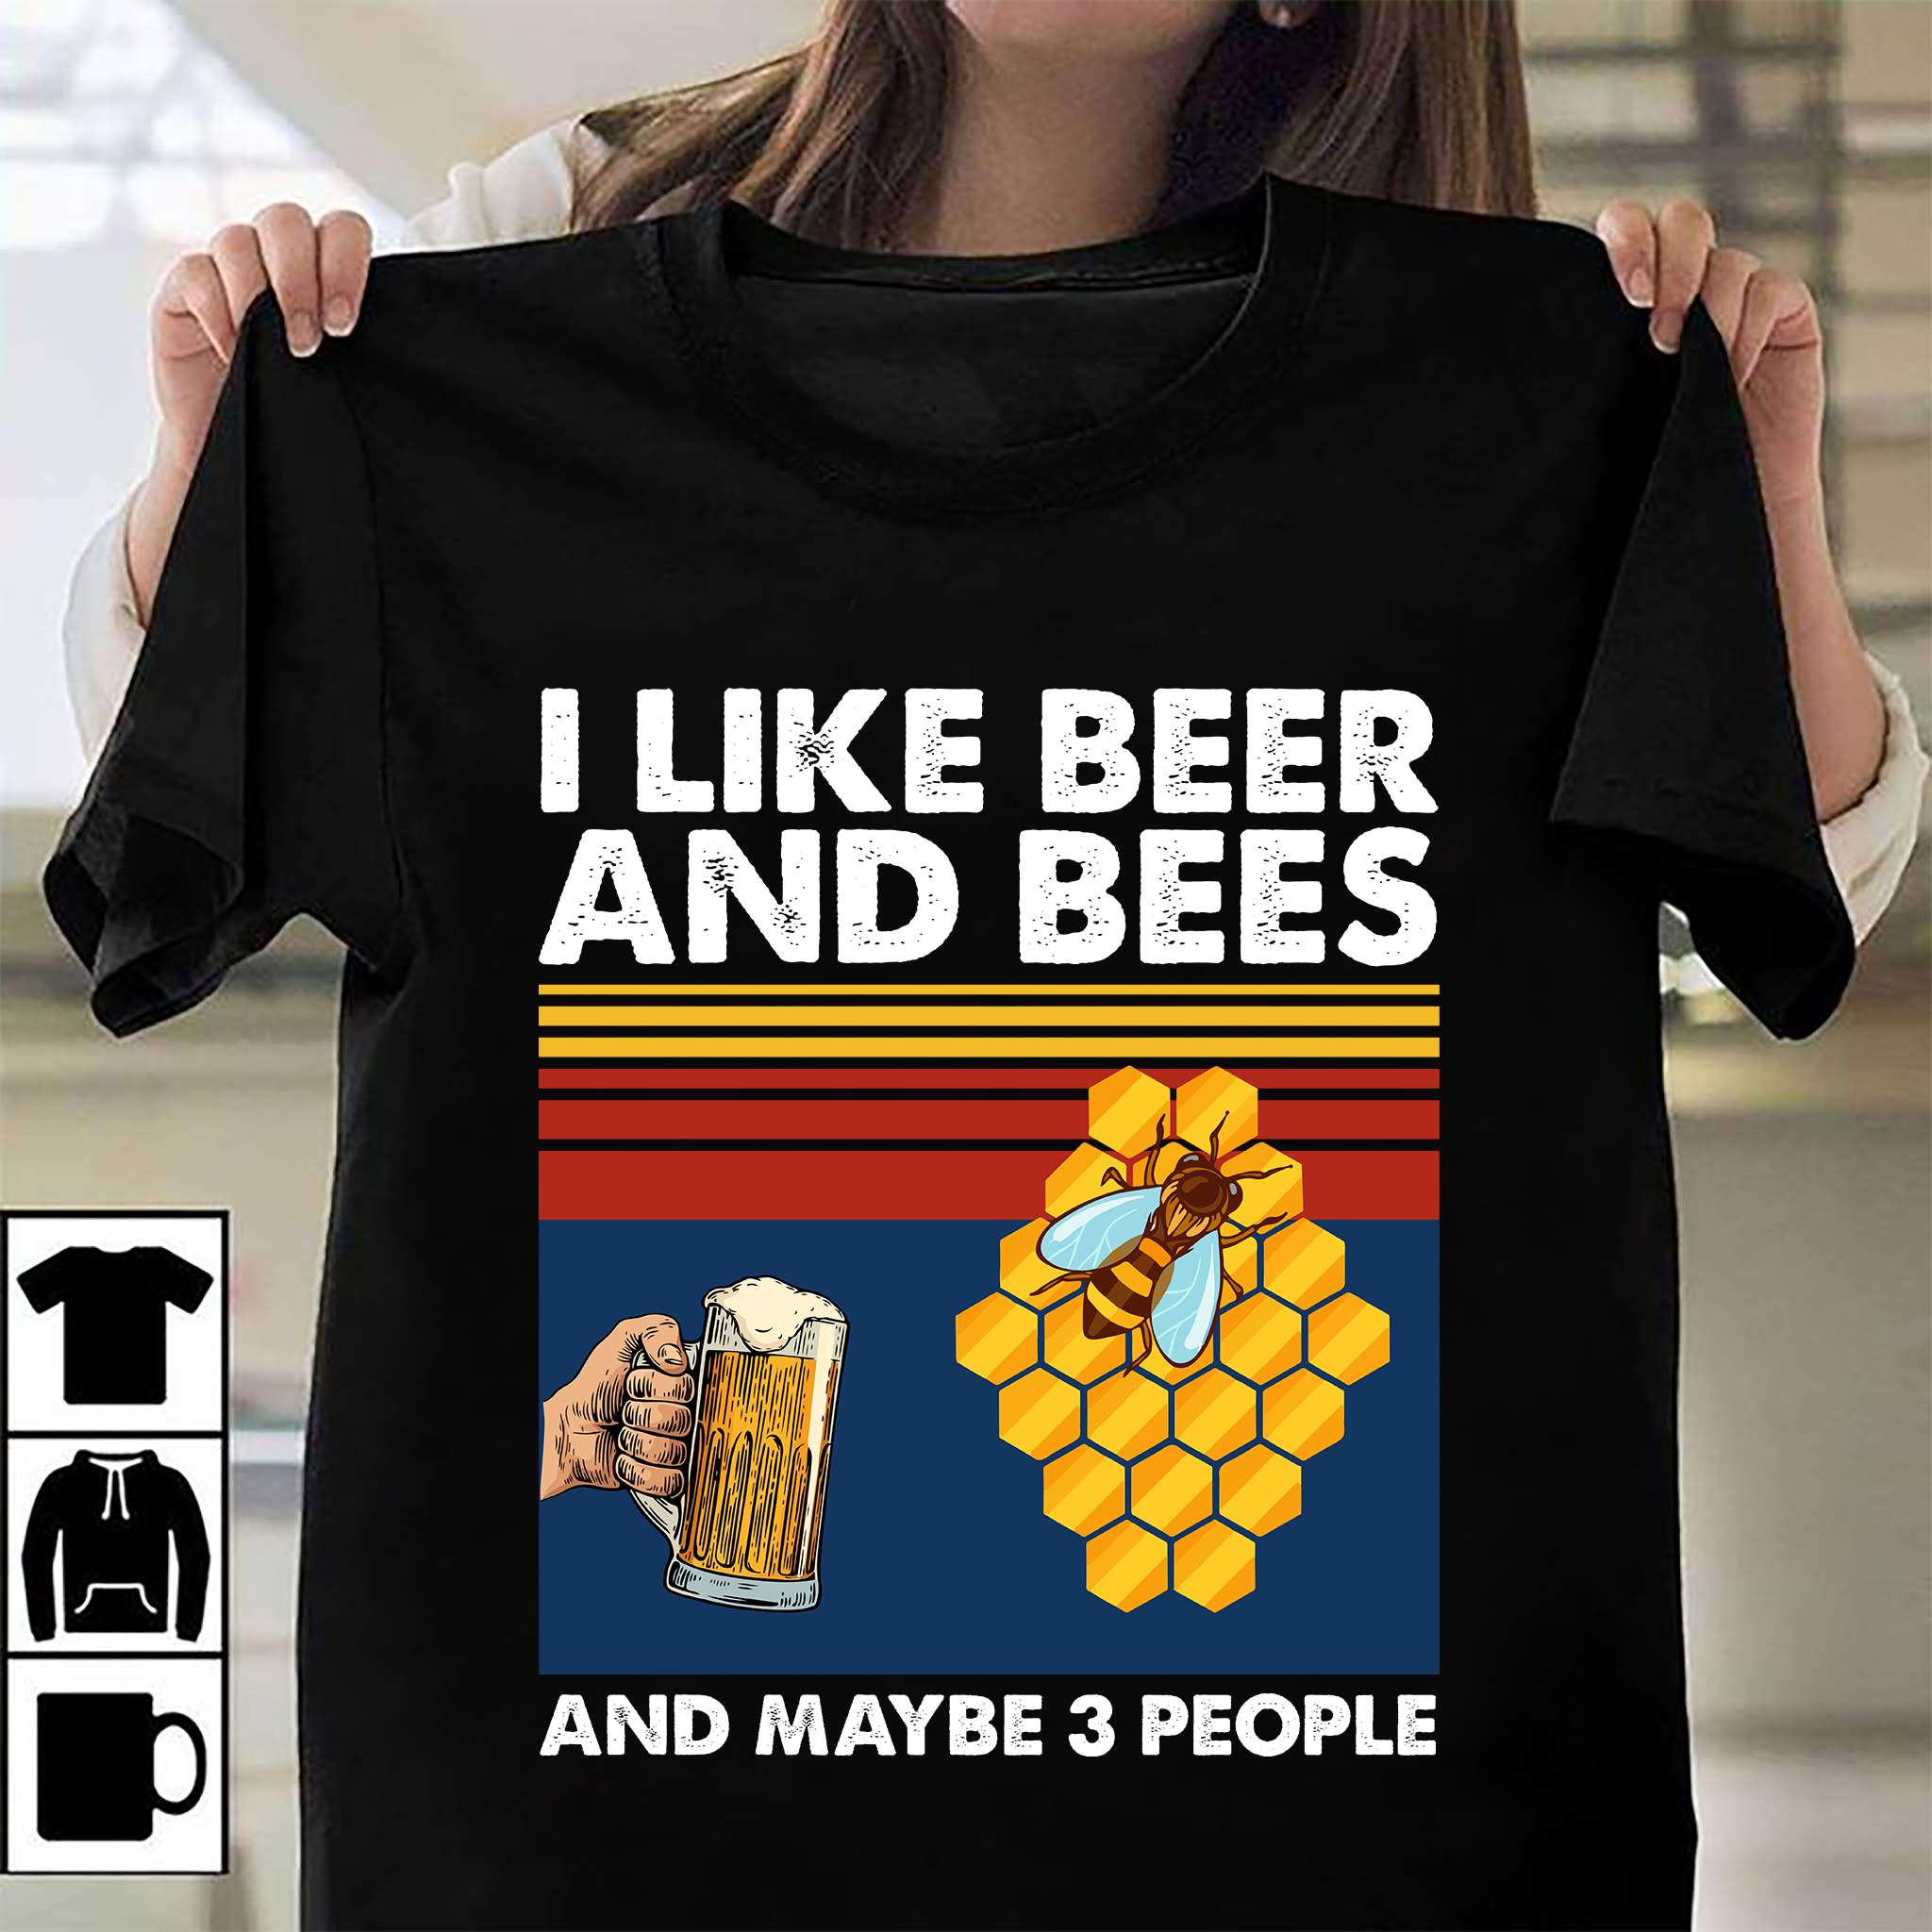 I like beer and bees and maybe 3 people - Drinking beer, bees animal